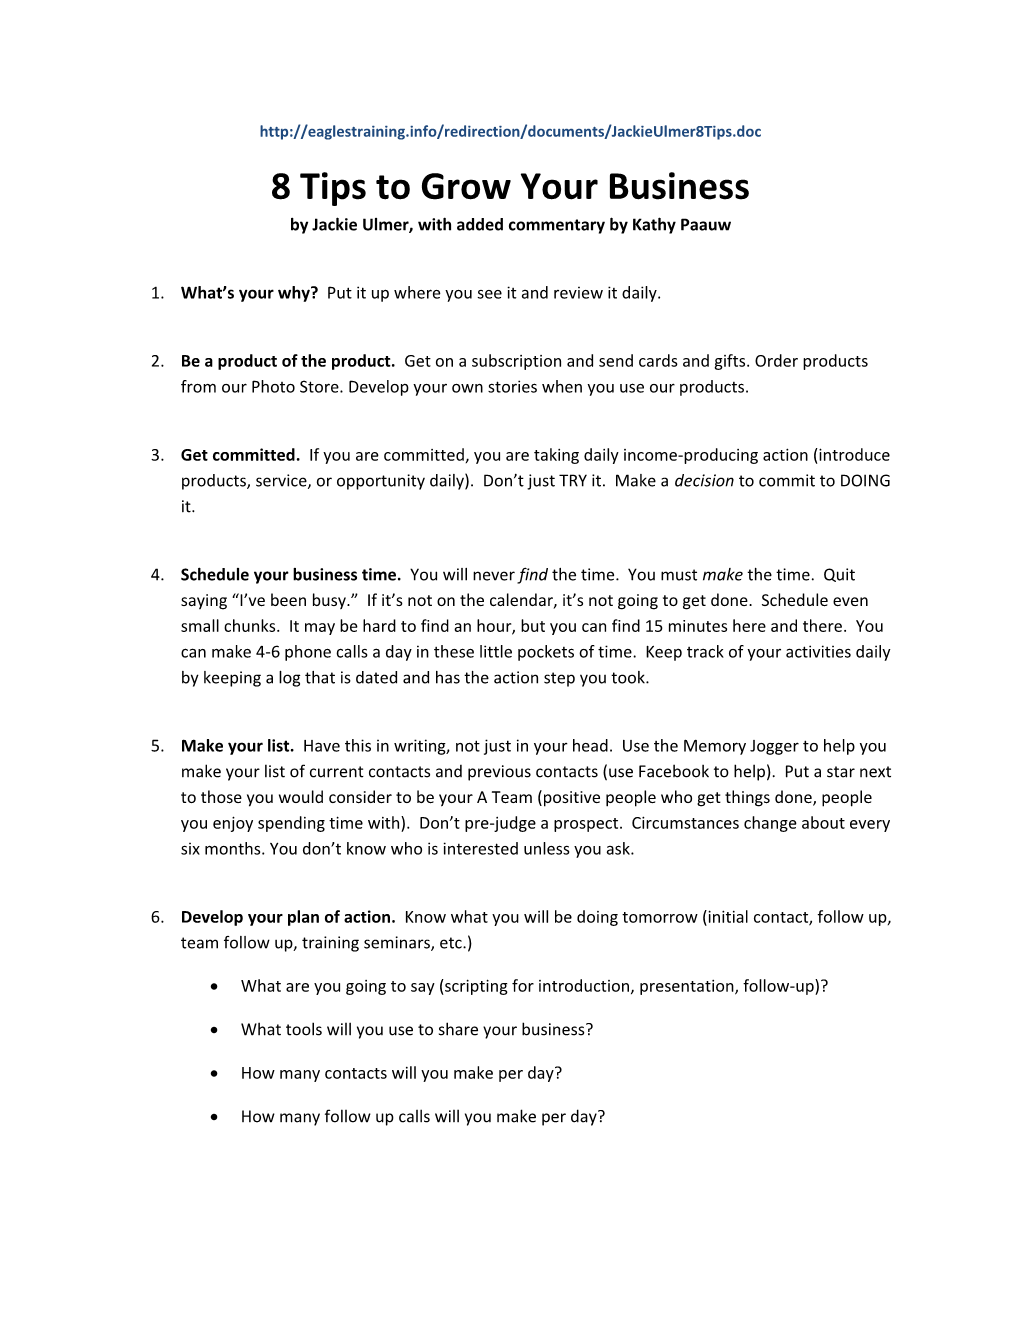 8 Tips to Grow Your Business by Jackie Ulmer, with Added Commentary by Kathy Paauw